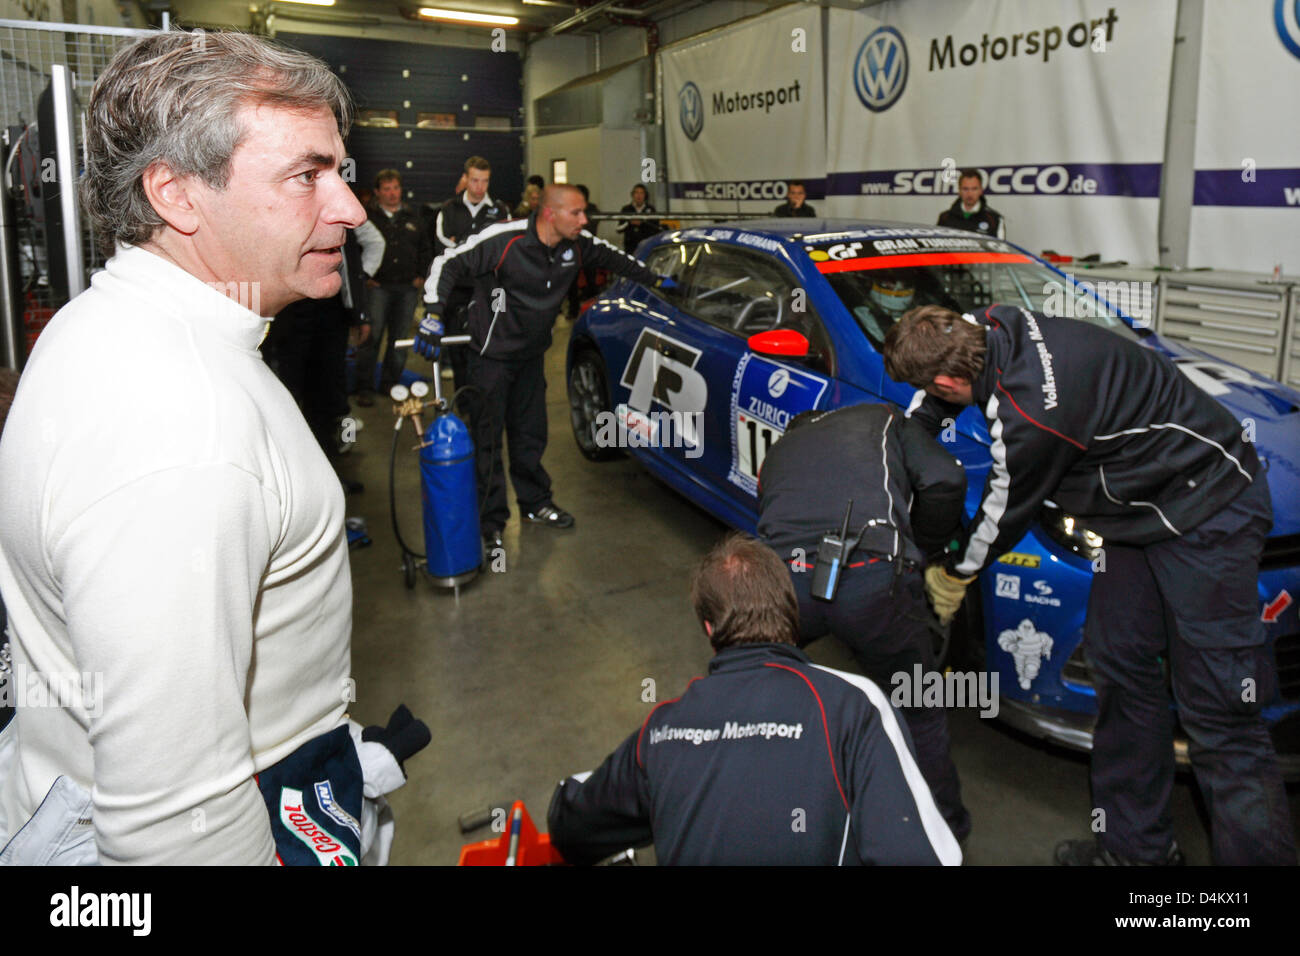 Rallye world champion Spanish Carlos Sainz (L) watches his crew service the VW Scirocco during the Nuerburgring 24 hours race, Nuerburgring, Germany, 24 May 2009. Photo: Thomas Frey Stock Photo